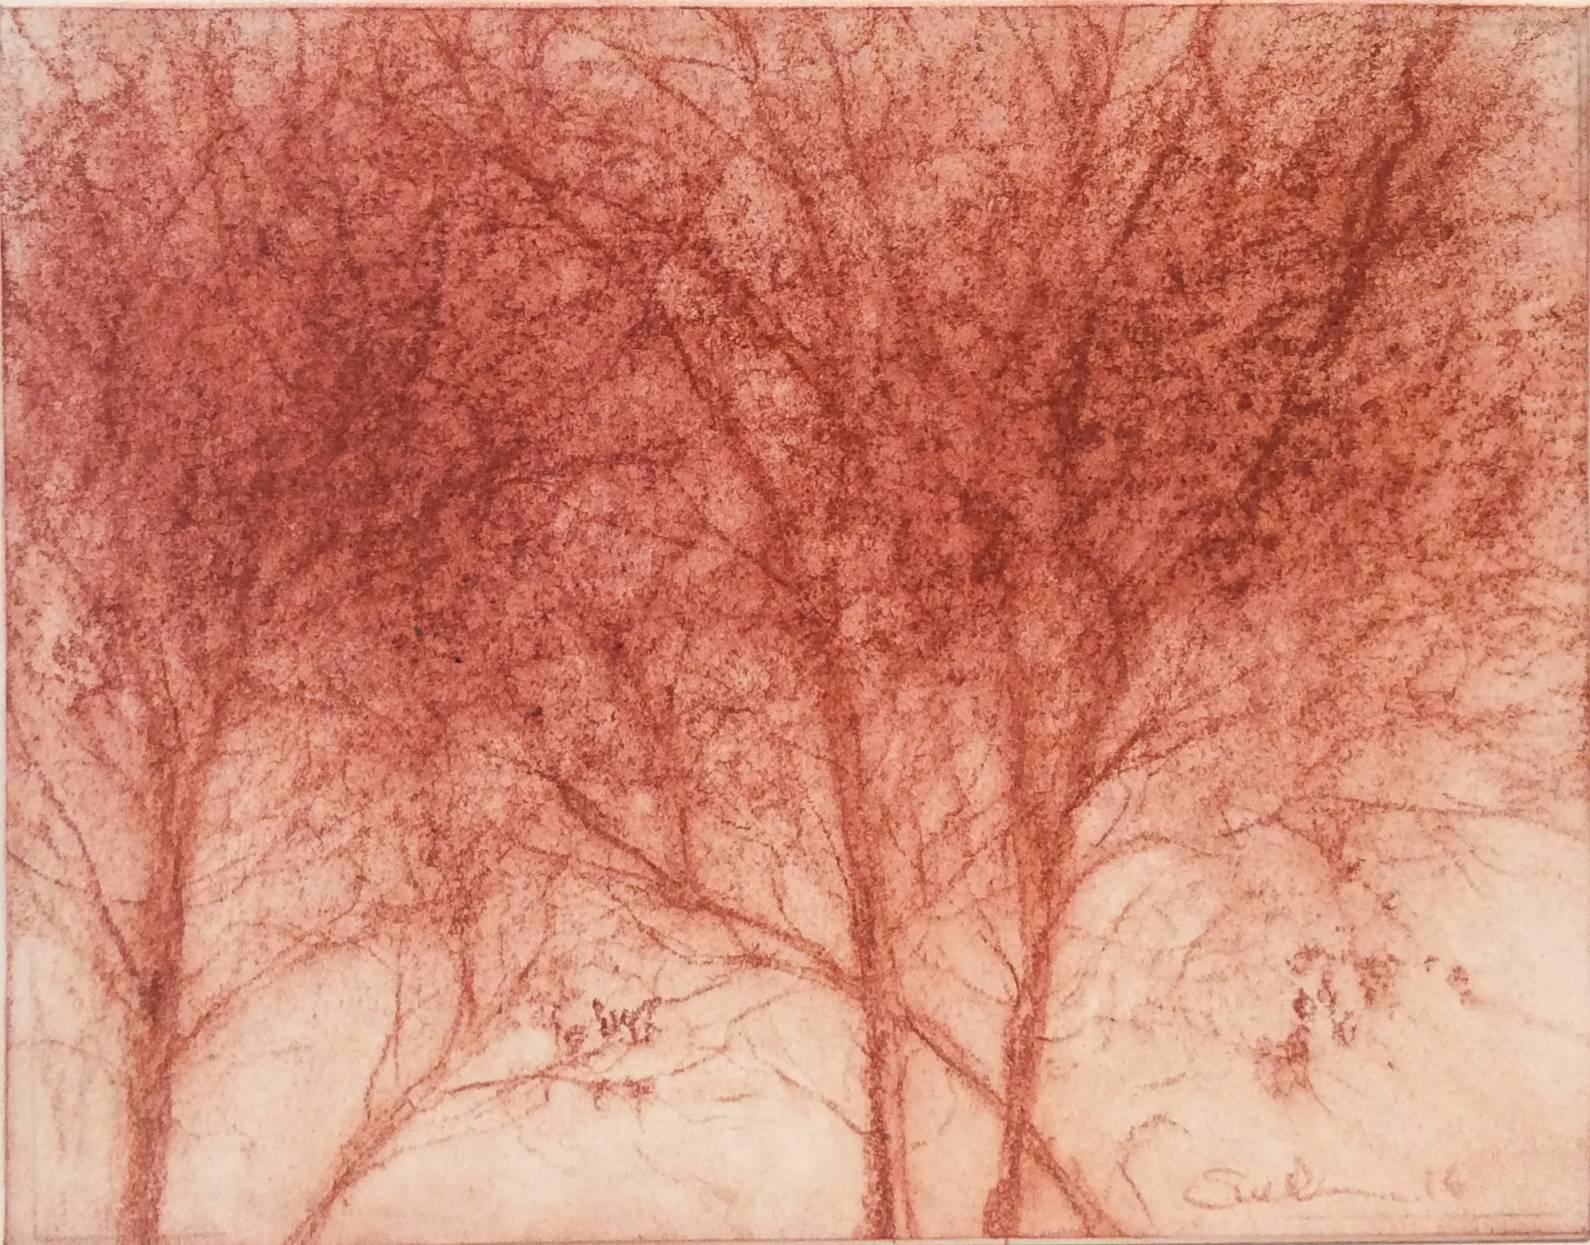 Sue Bryan Landscape Art - Red Trees 2 (Modern, Realistic Red Sanguine Chalk Drawing of Trees in Landscape)